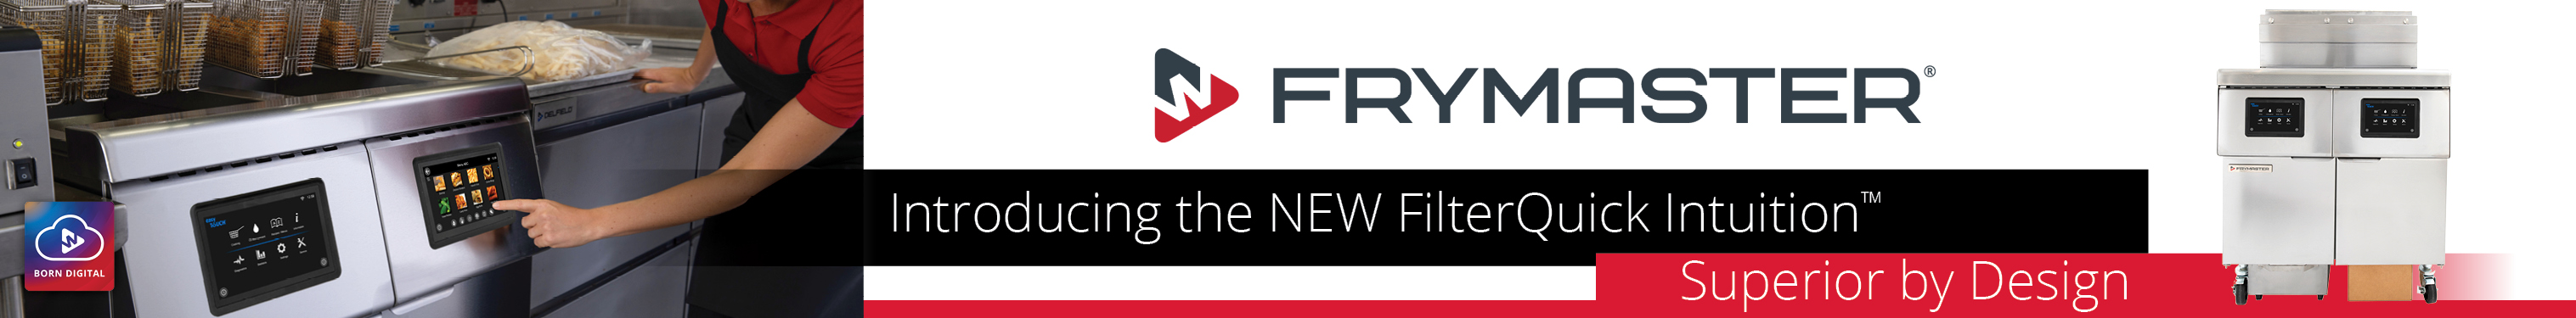 Welbilt Frymaster. Introducing the NEW Filterquick Intuition. Superior by design. Find out more.